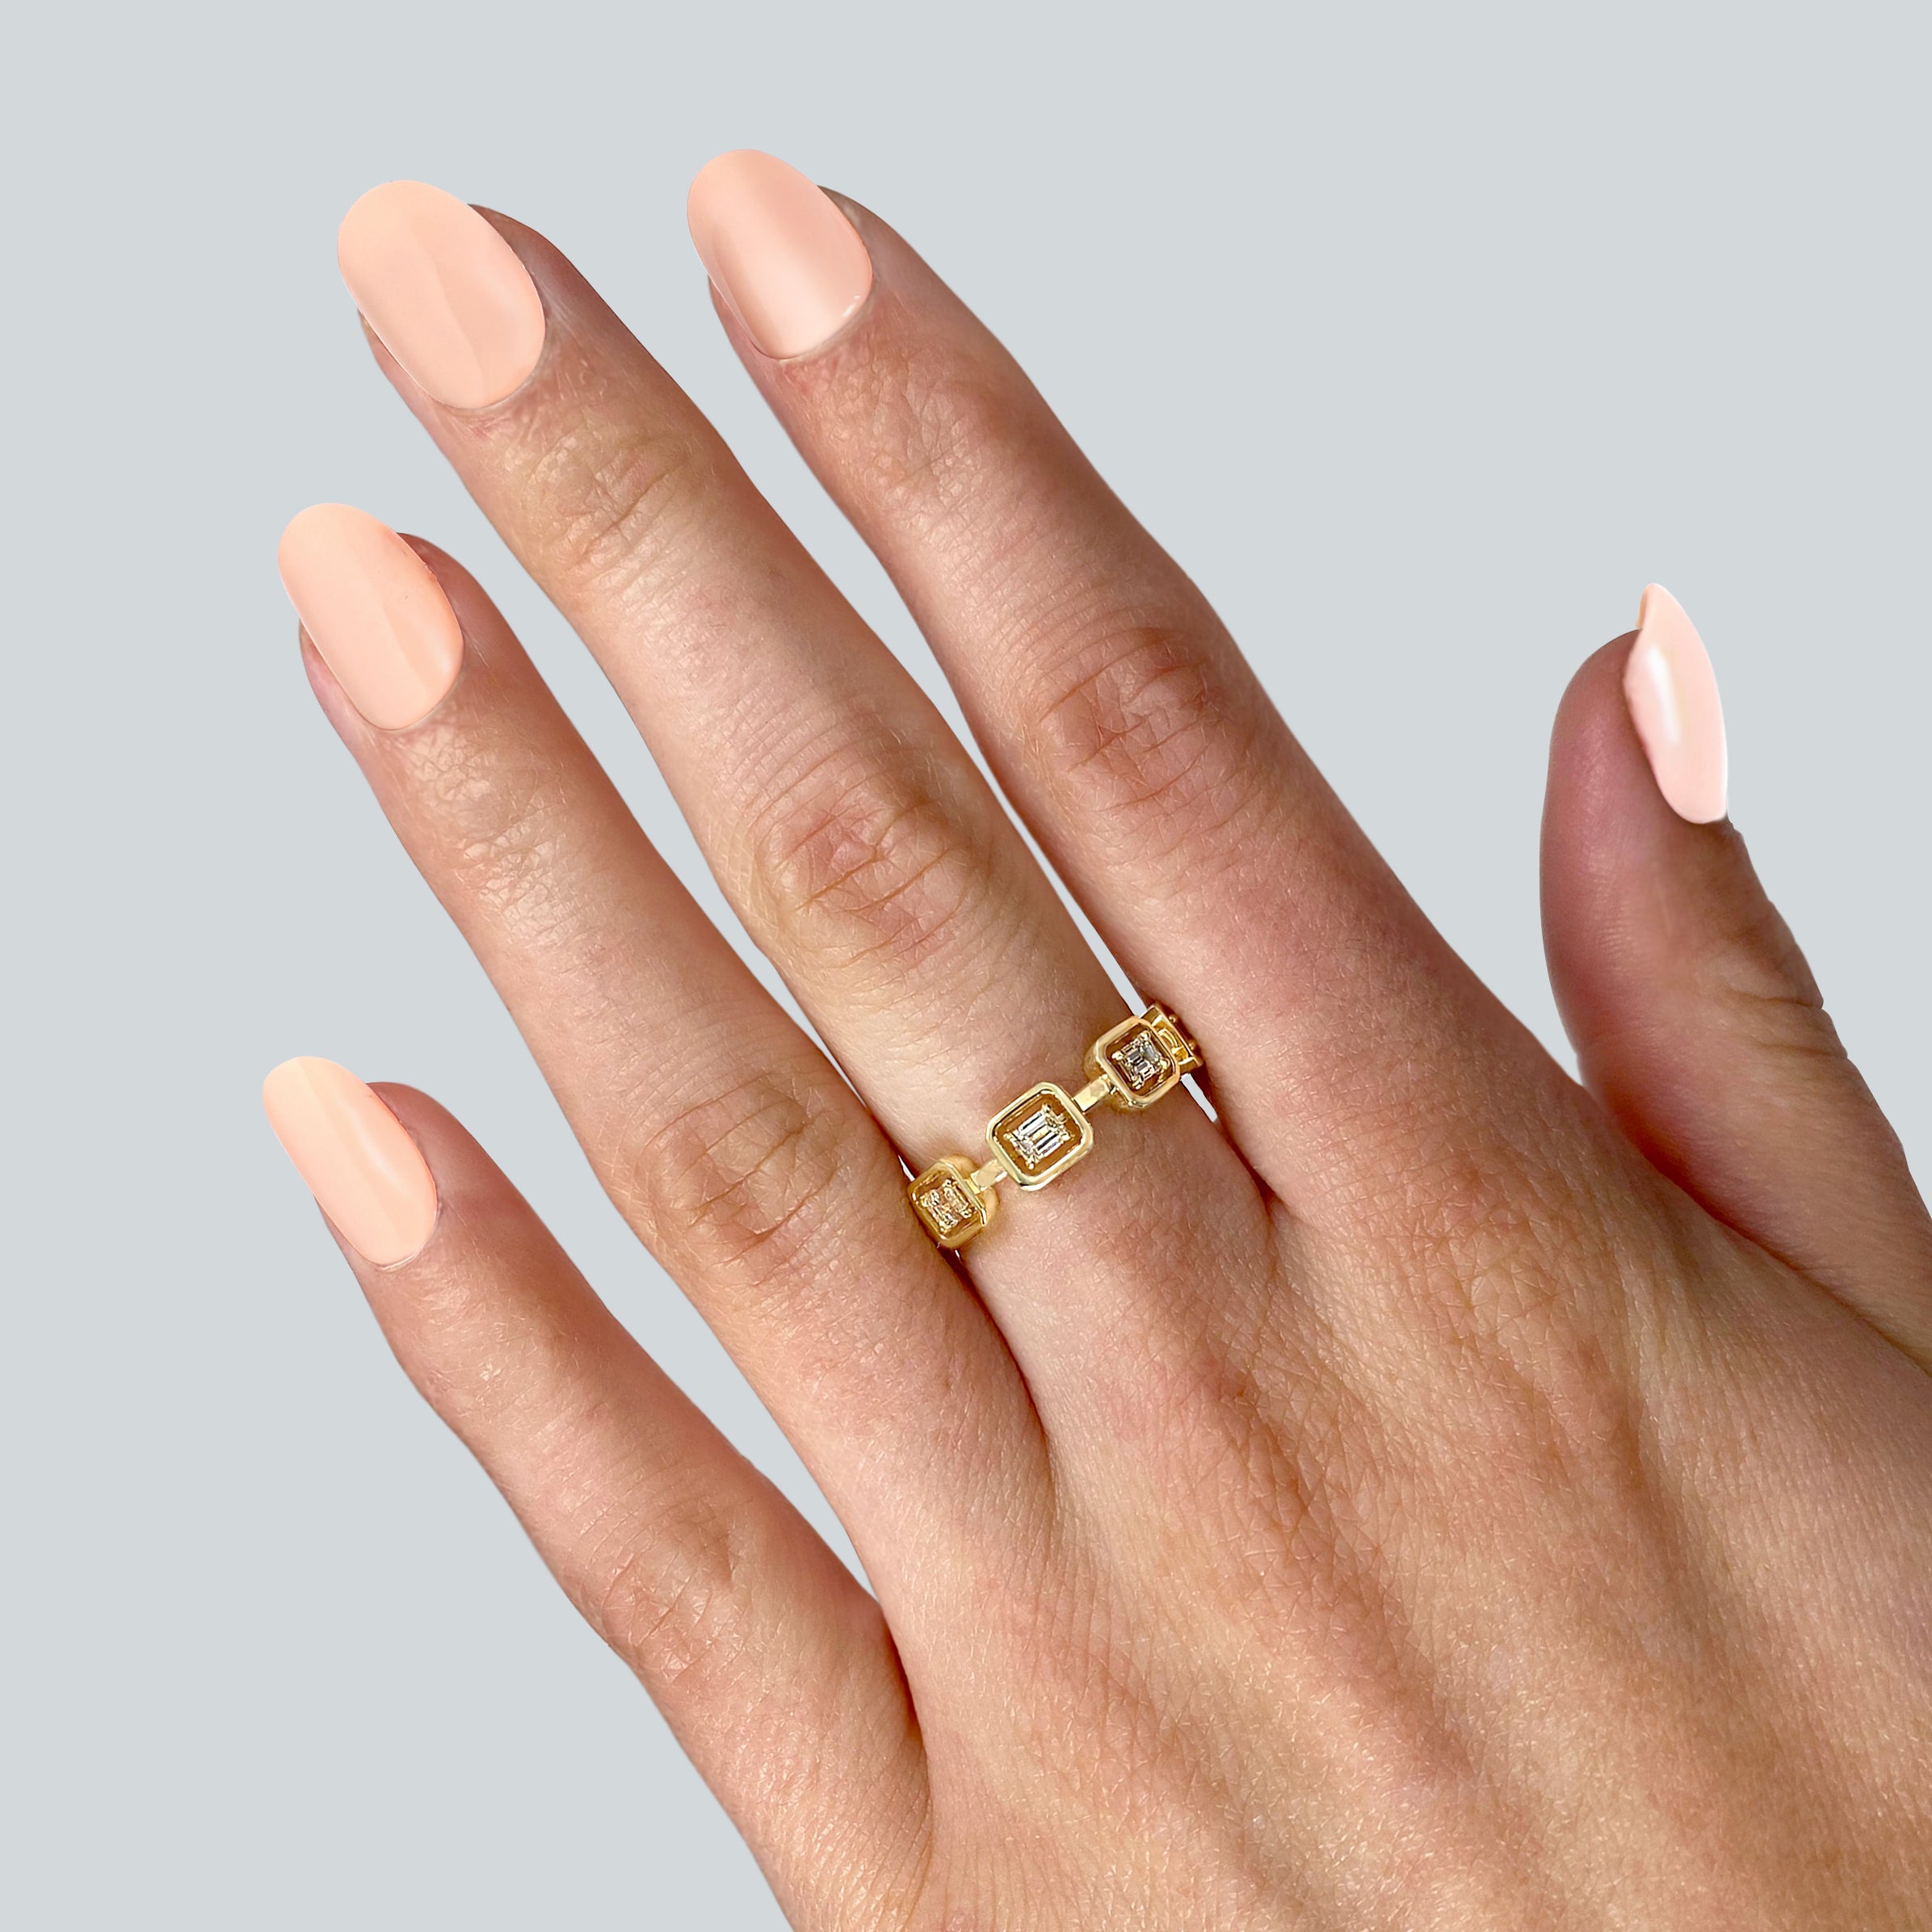 Shimansky - Women Wearing the Saturn Emerald Eternity Diamond Ring 0.80ct crafted in 14K Yellow Gold